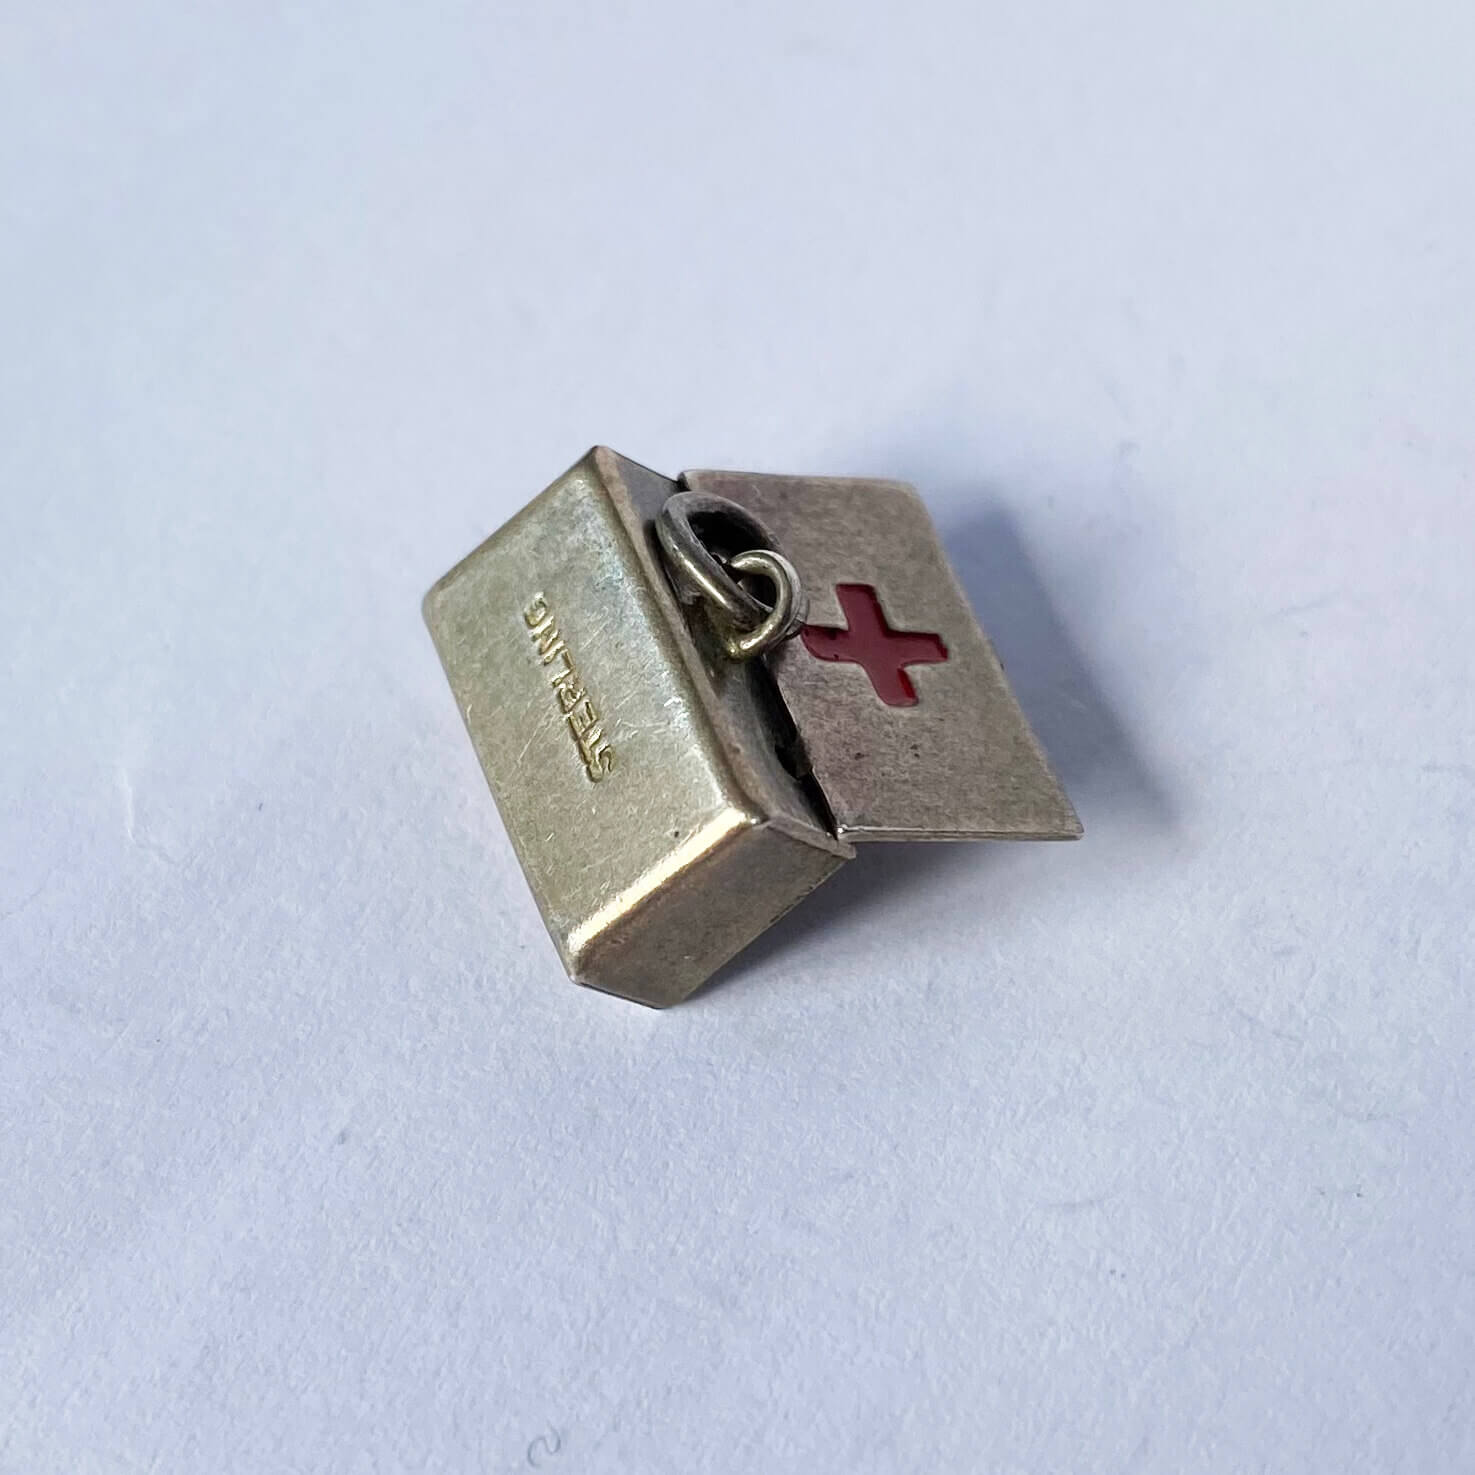 Vintage WWII Sterling silver First Aid Box Charm with red enamel cross